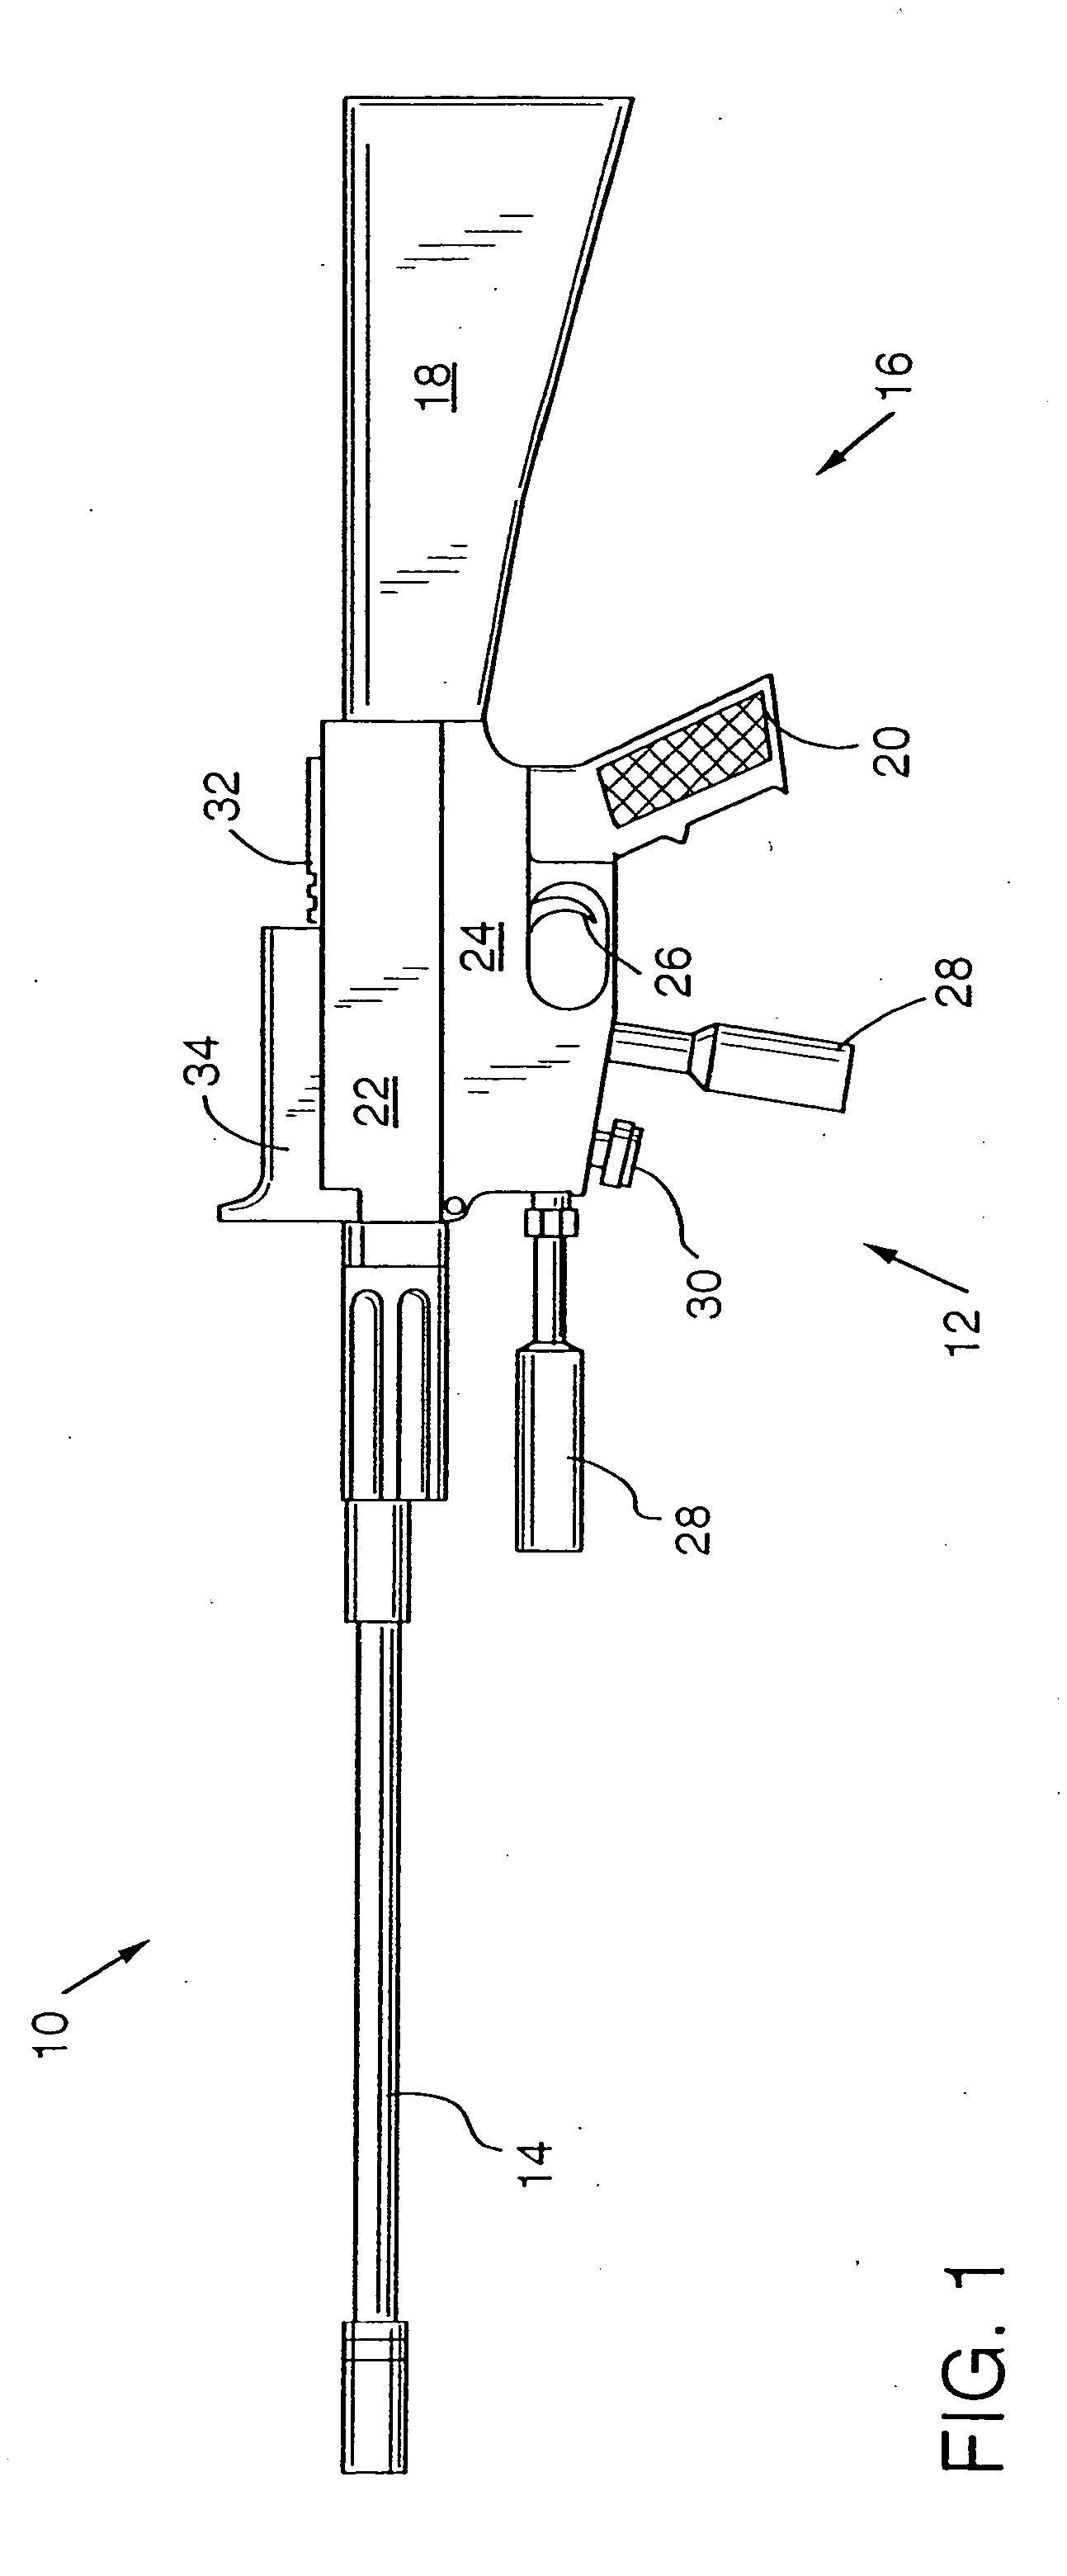 Compressed gas-powered gun simulating the recoil of a conventional firearm